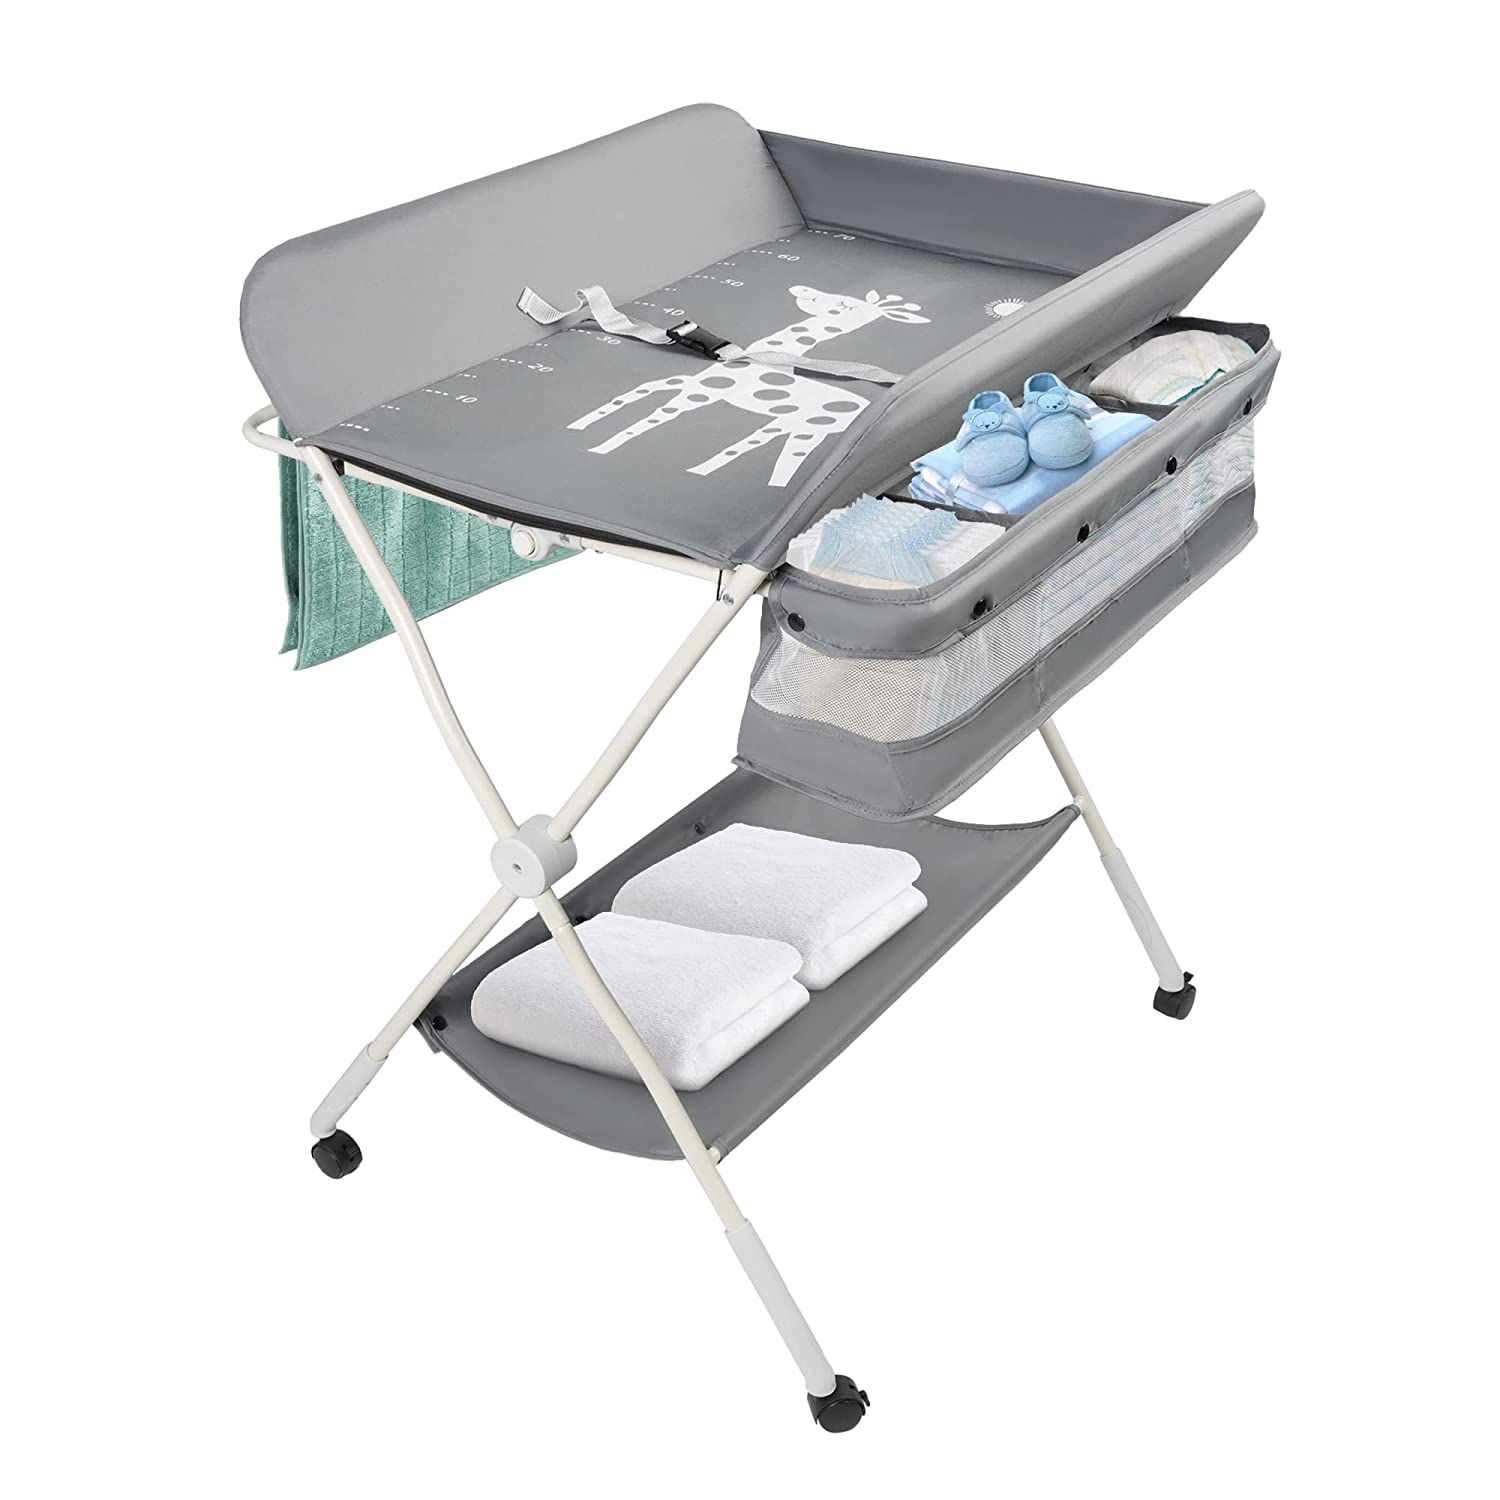 (Out of Stock) Folding Portable Baby Diaper Changing Station with Wheels, Adjustable Height Changing Table